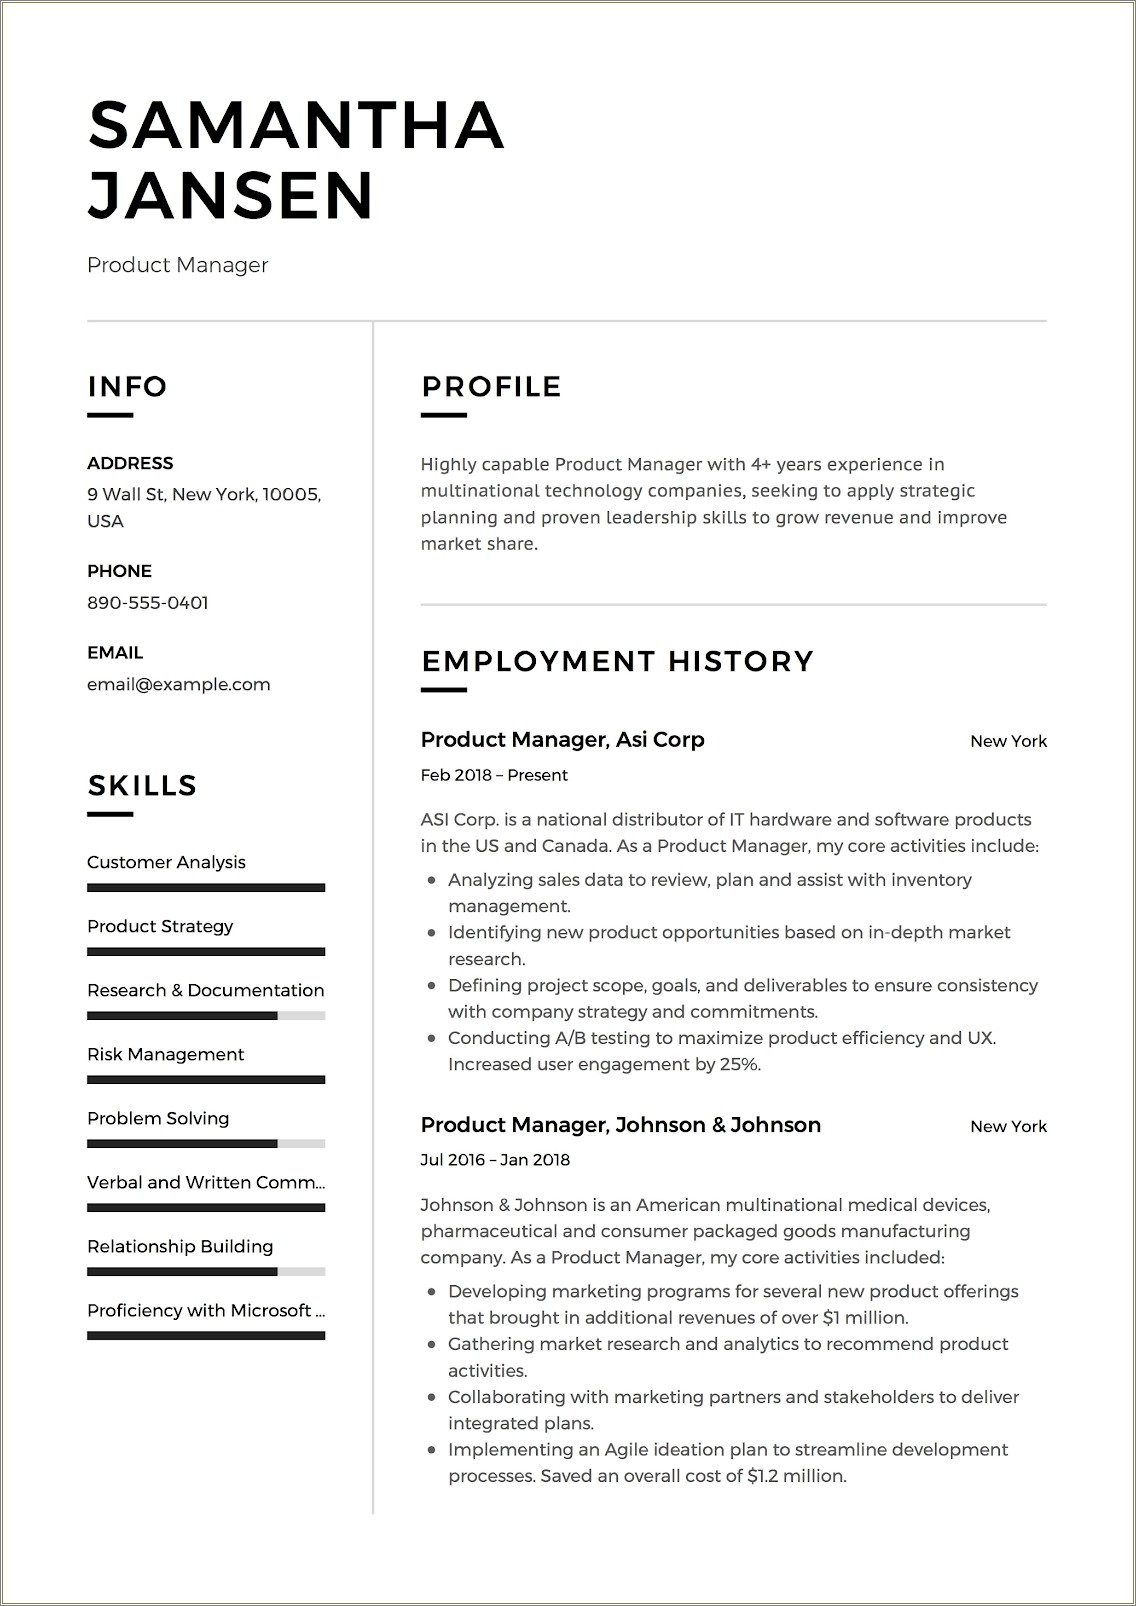 About Me Sample Text For Resume